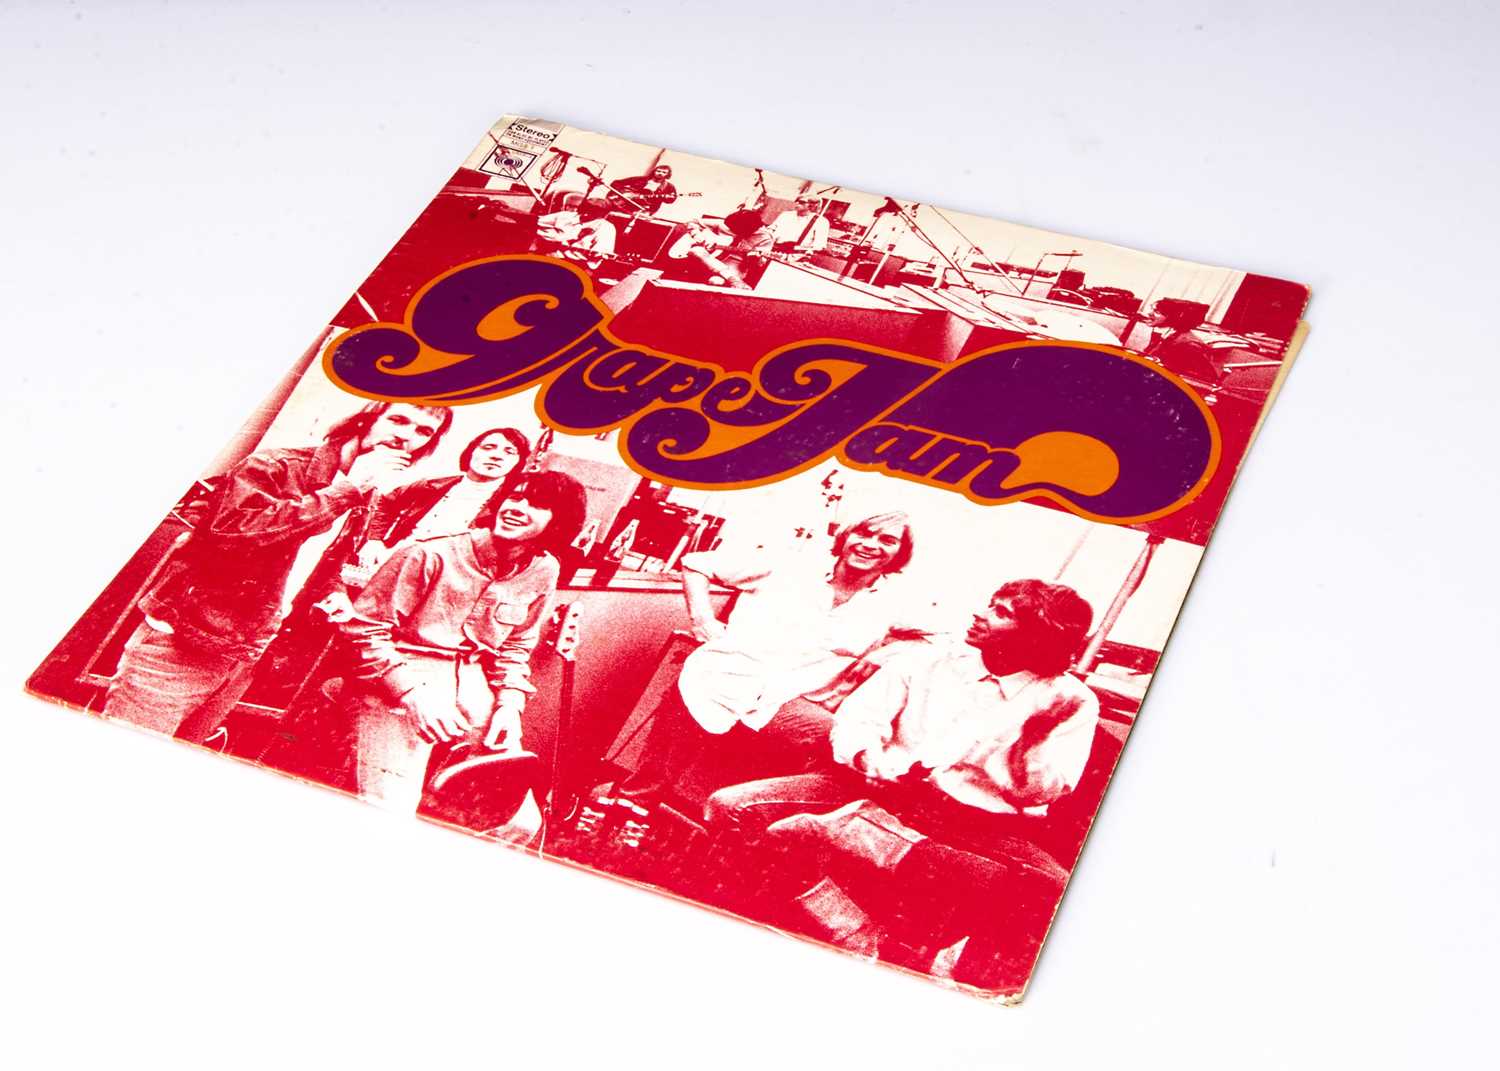 Moby Grape LPs, - Image 2 of 2